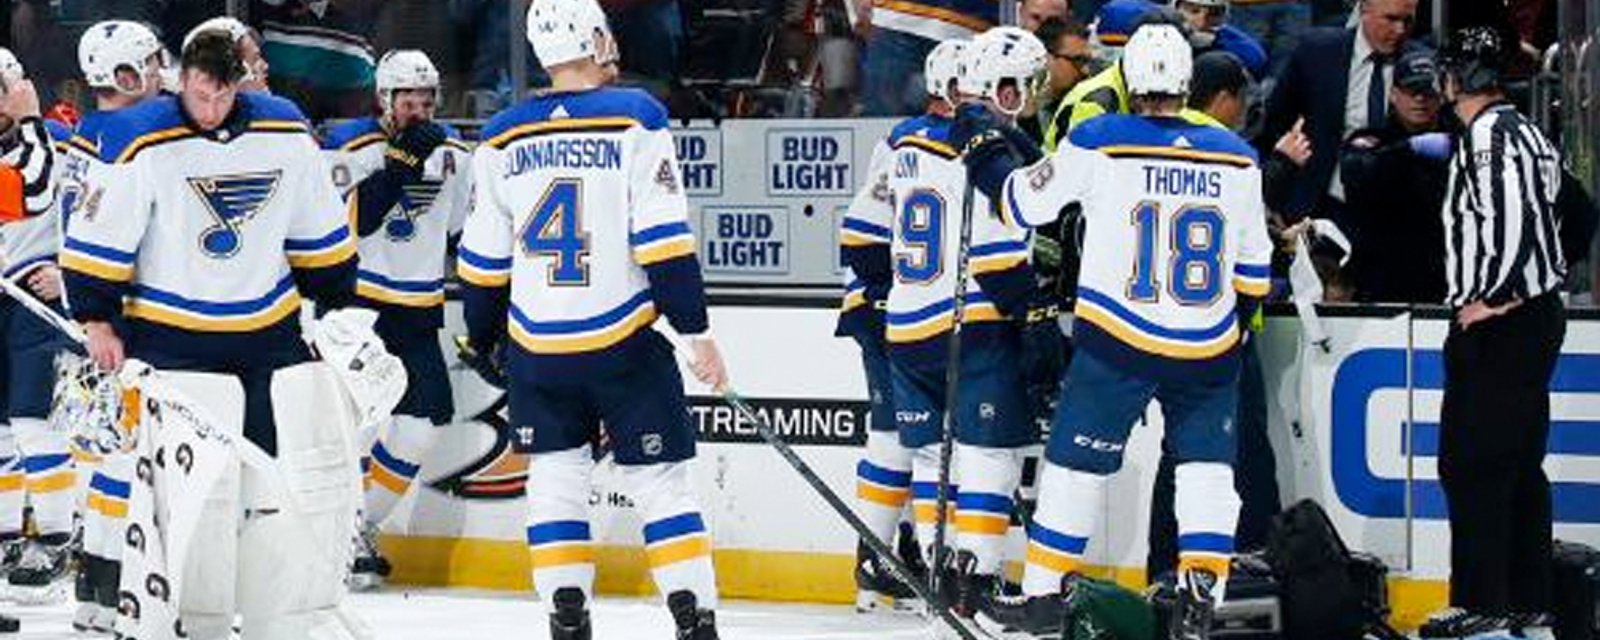 Blues offer counselling to players following Bouwmeester incident